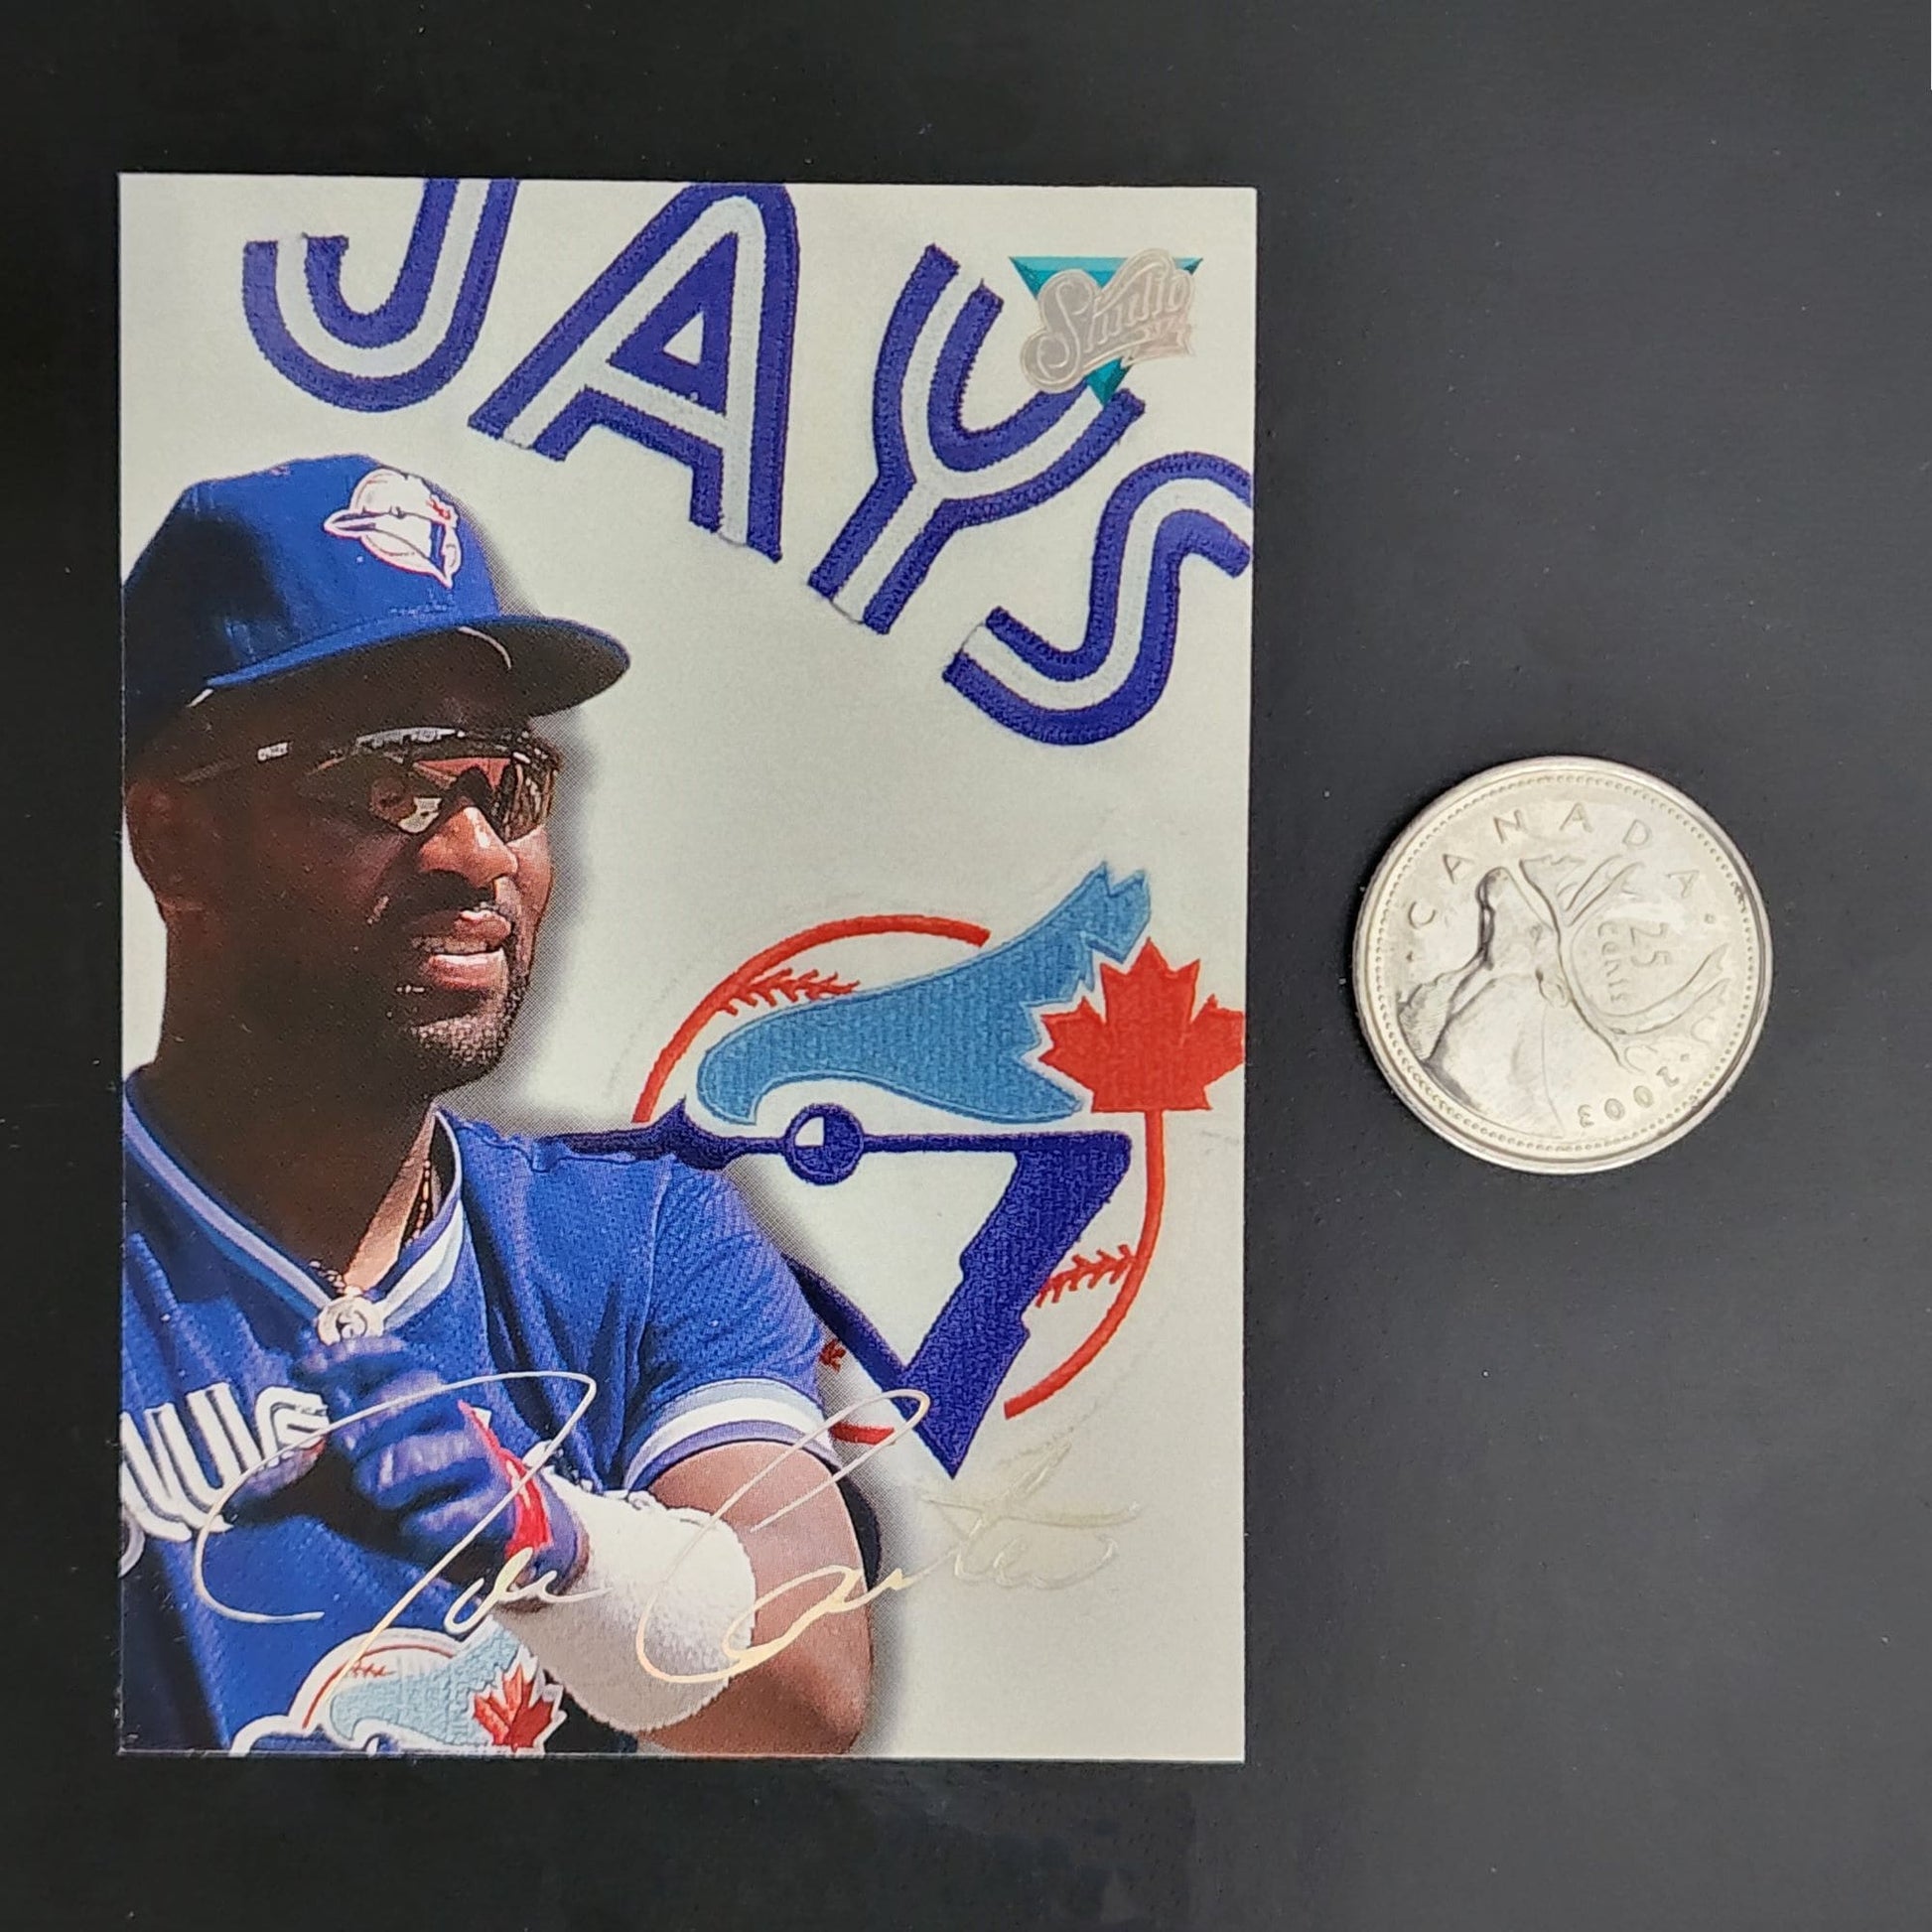 A baseball card featuring a coin beside it, showcasing a valuable collectible item.